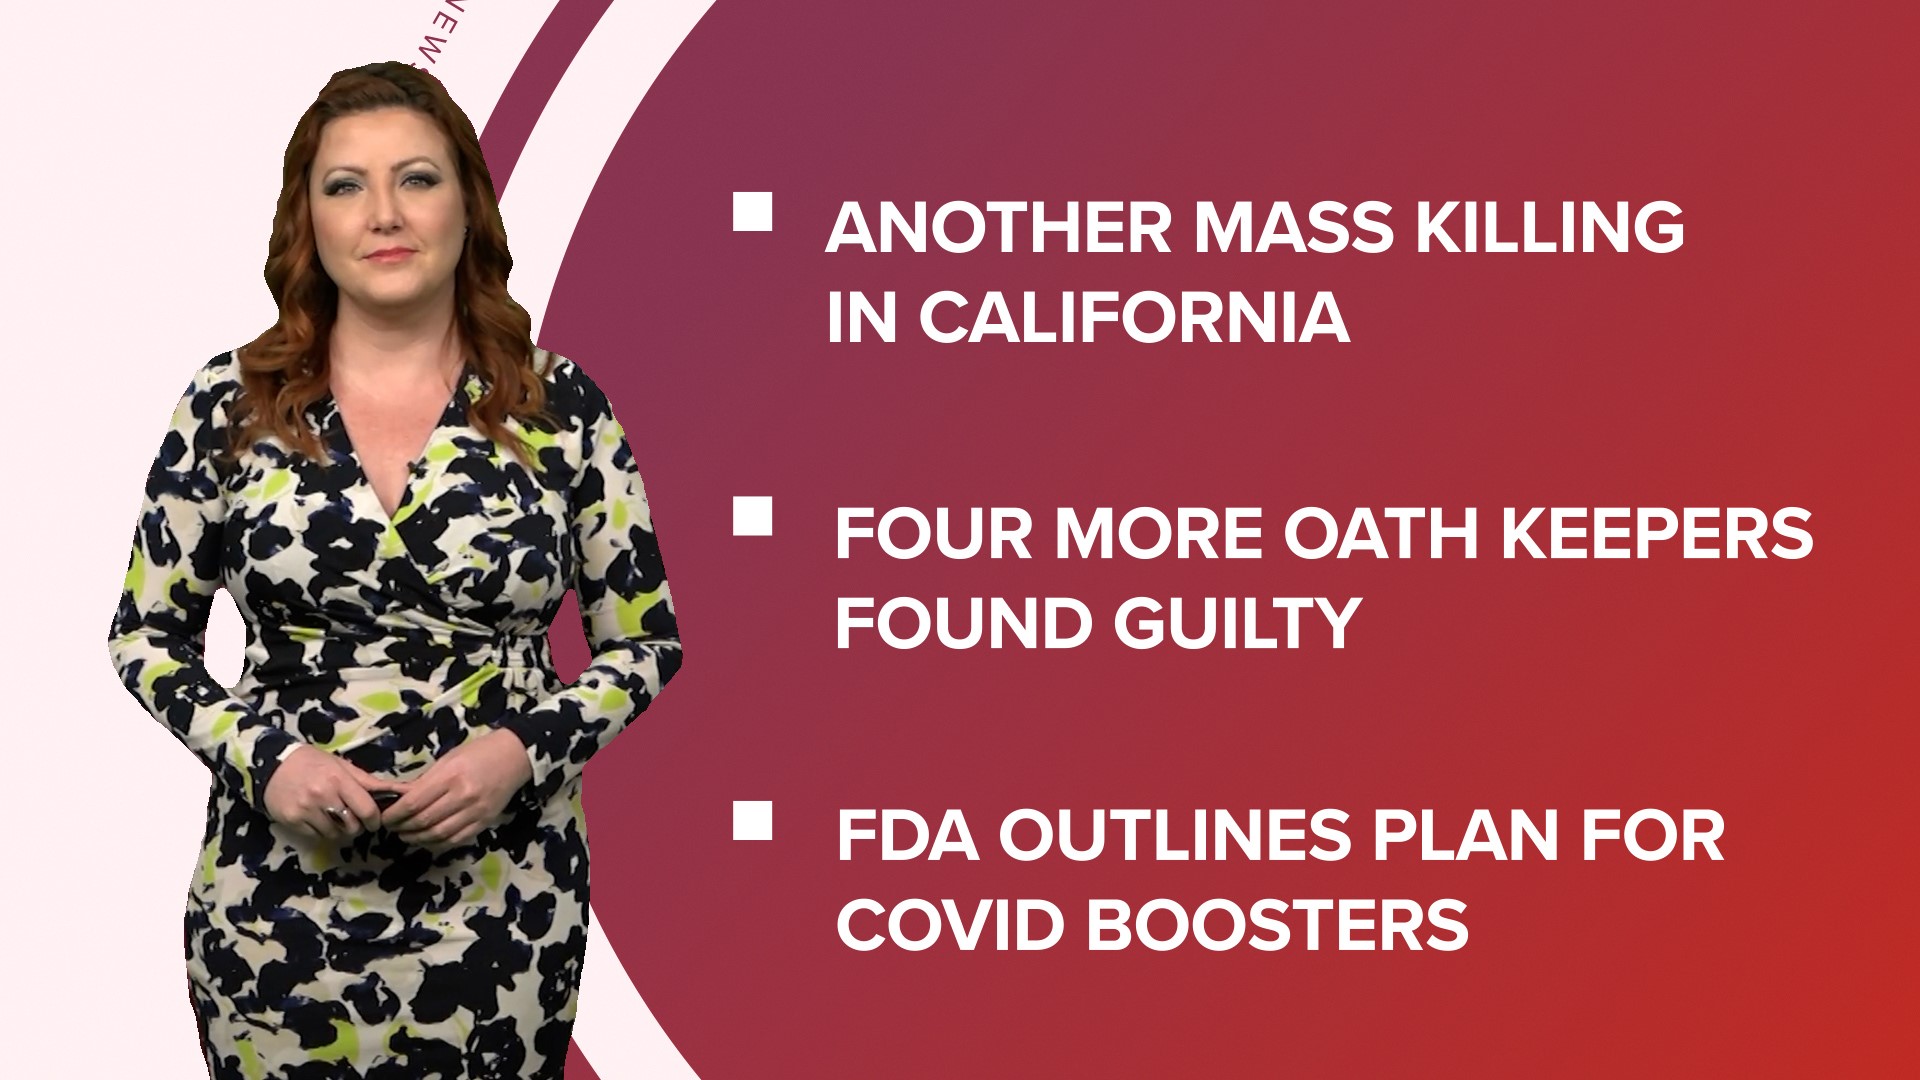 A look at what is happening in the news from a second mass shooting in California to Oath Keepers being sentenced and an antibiotic shortage.